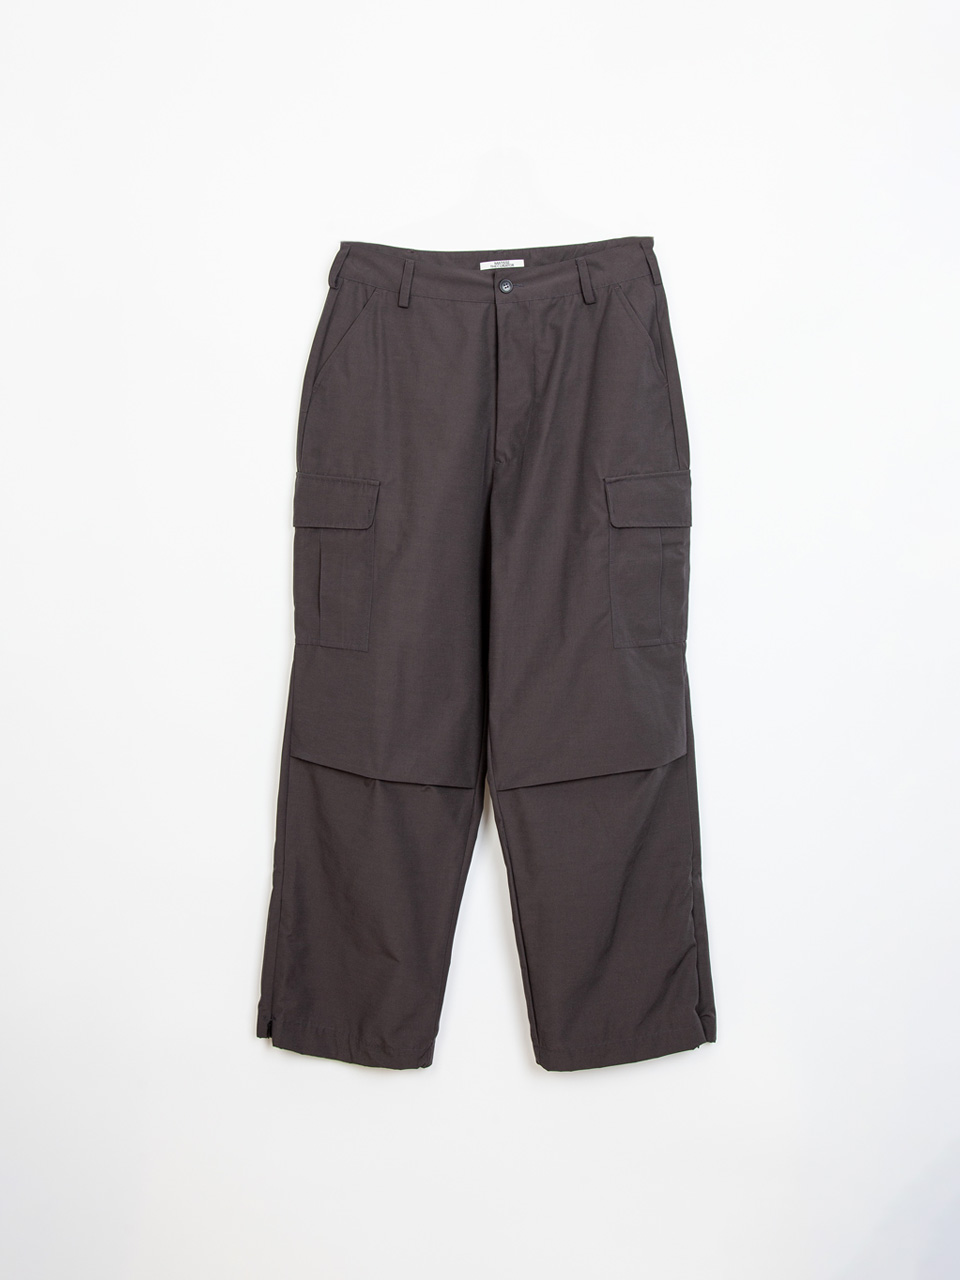 MATISSE THE CURATOR - FIELD PANTS (CHARCOAL)